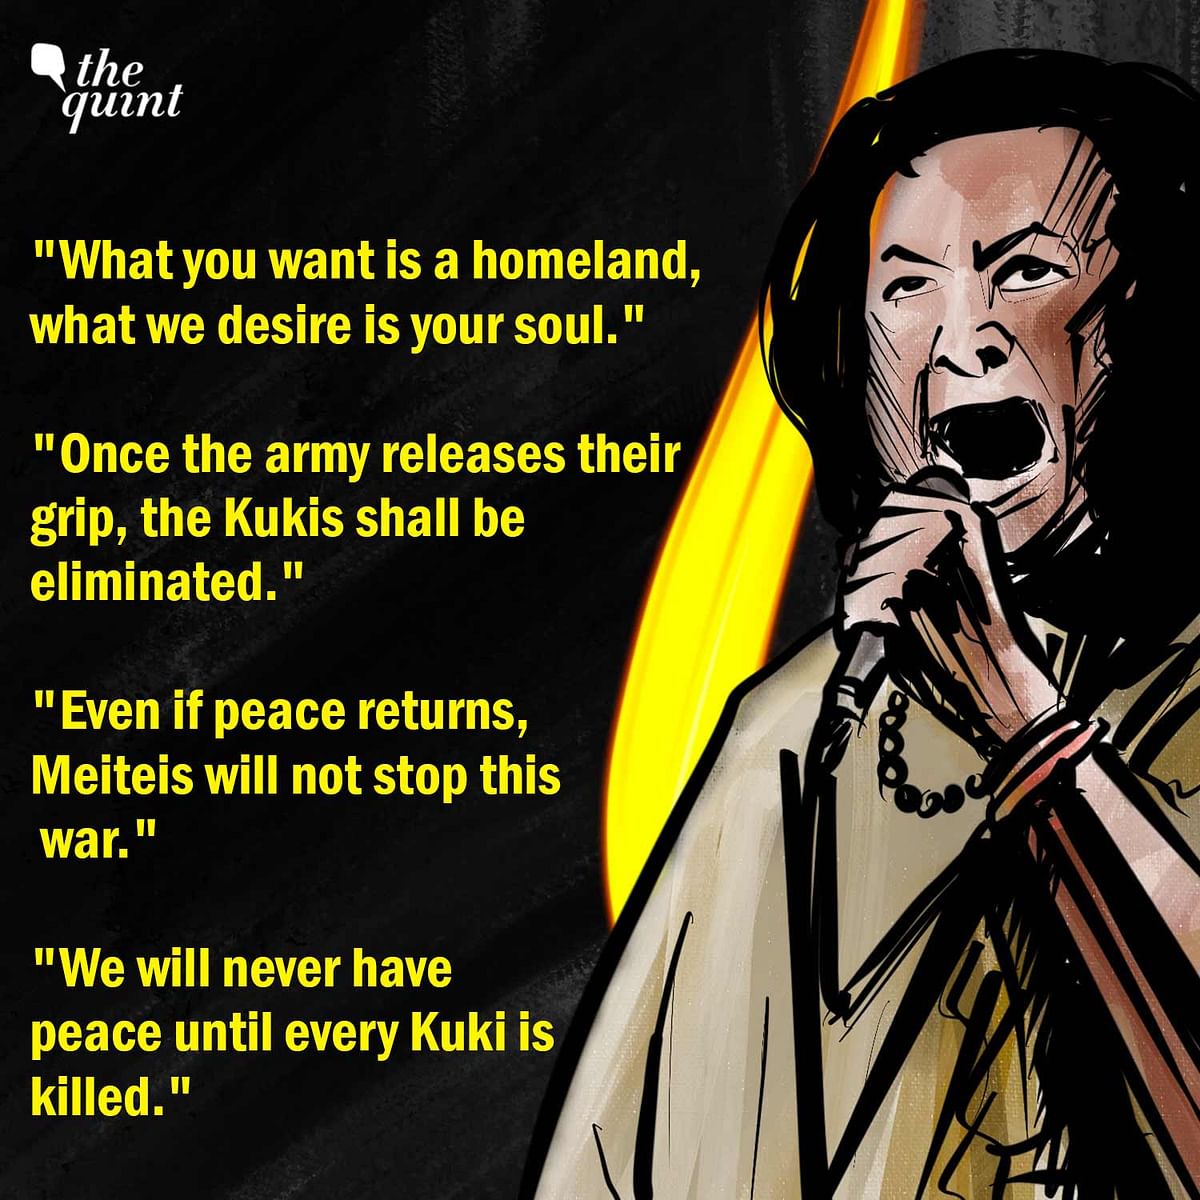 Speaking to The Quint, the popular Meitei singer has stood by his lyrics and blamed Kukis for the ongoing violence.